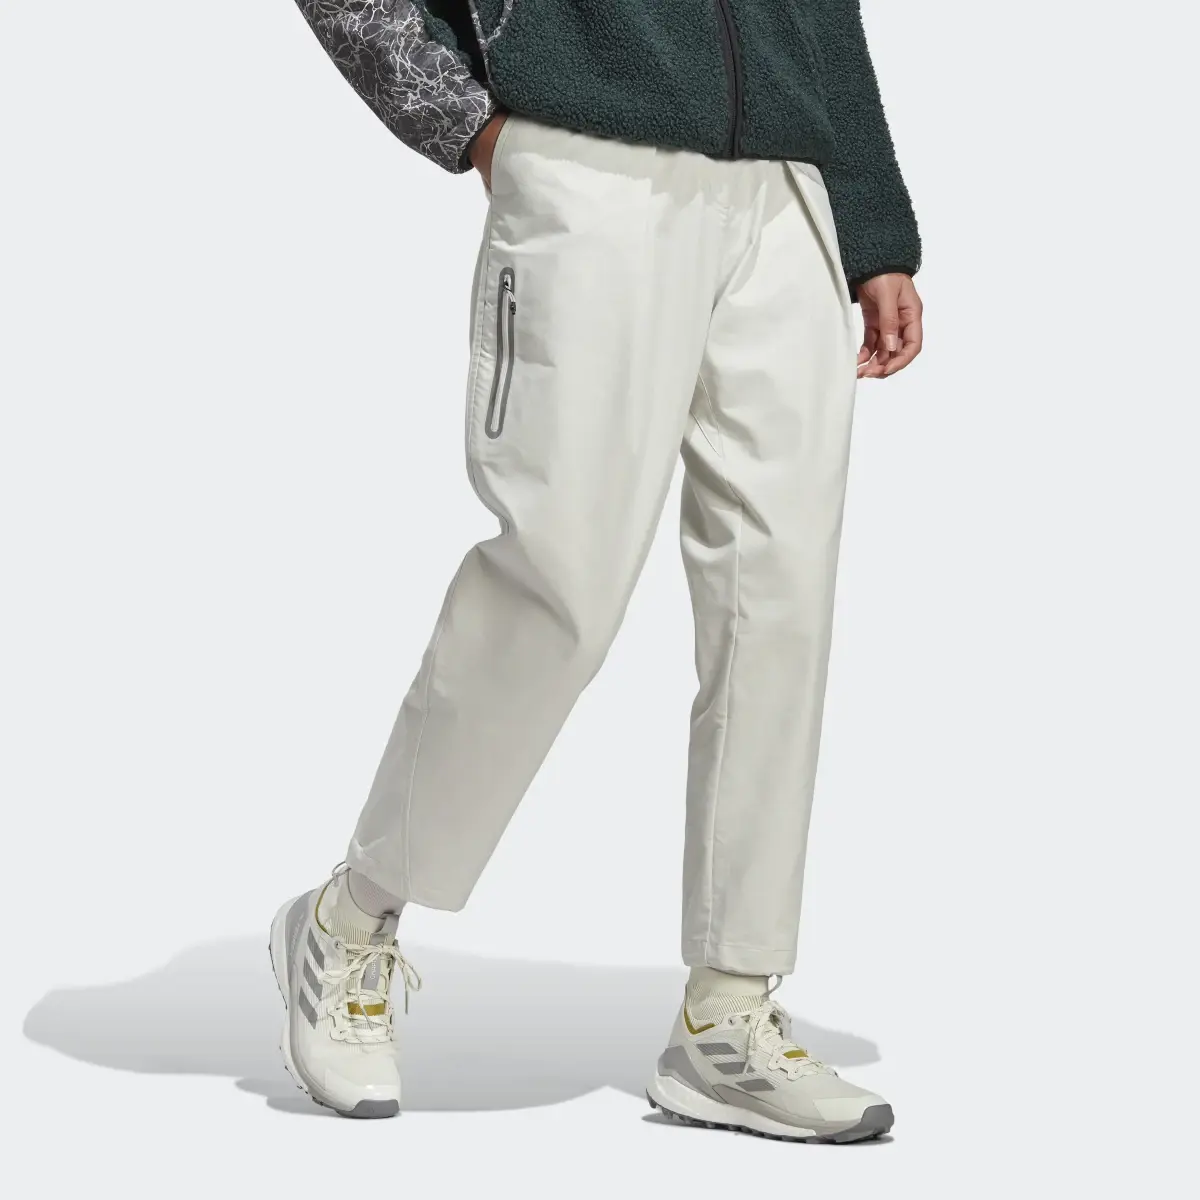 Adidas Terrex x and wander Trousers. 3